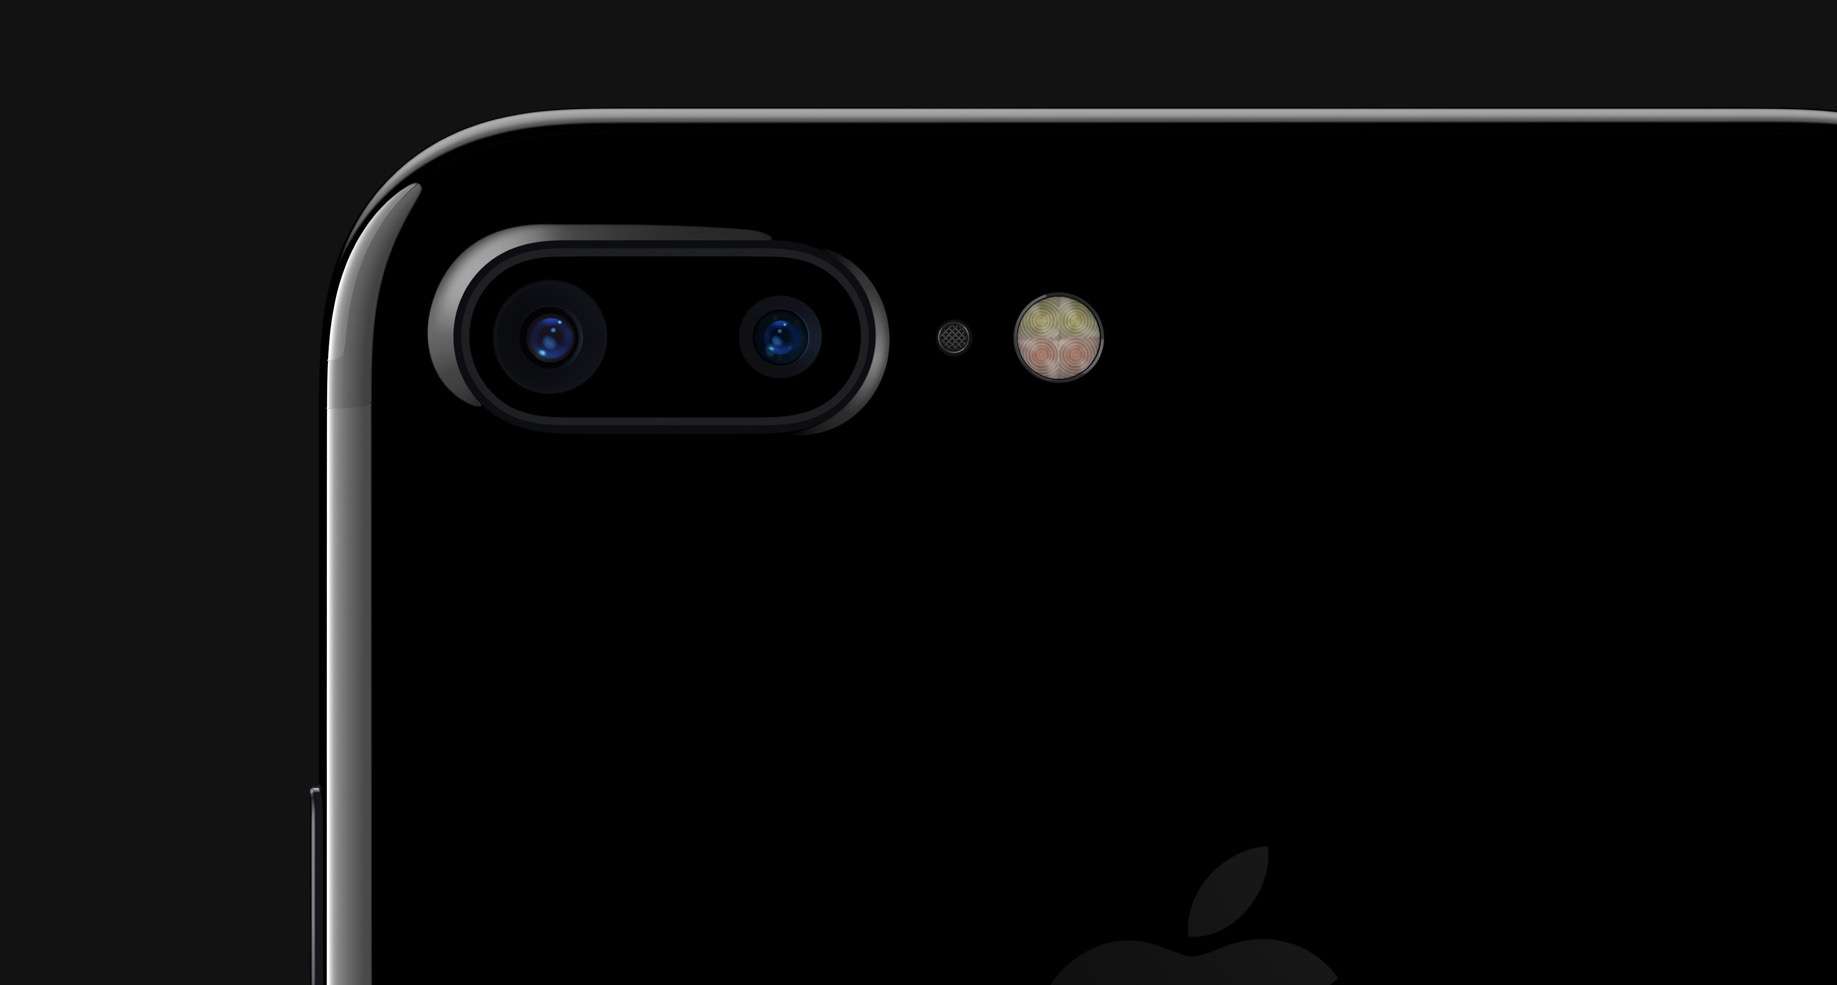 The iPhone 7 Plus will completely change your photos.